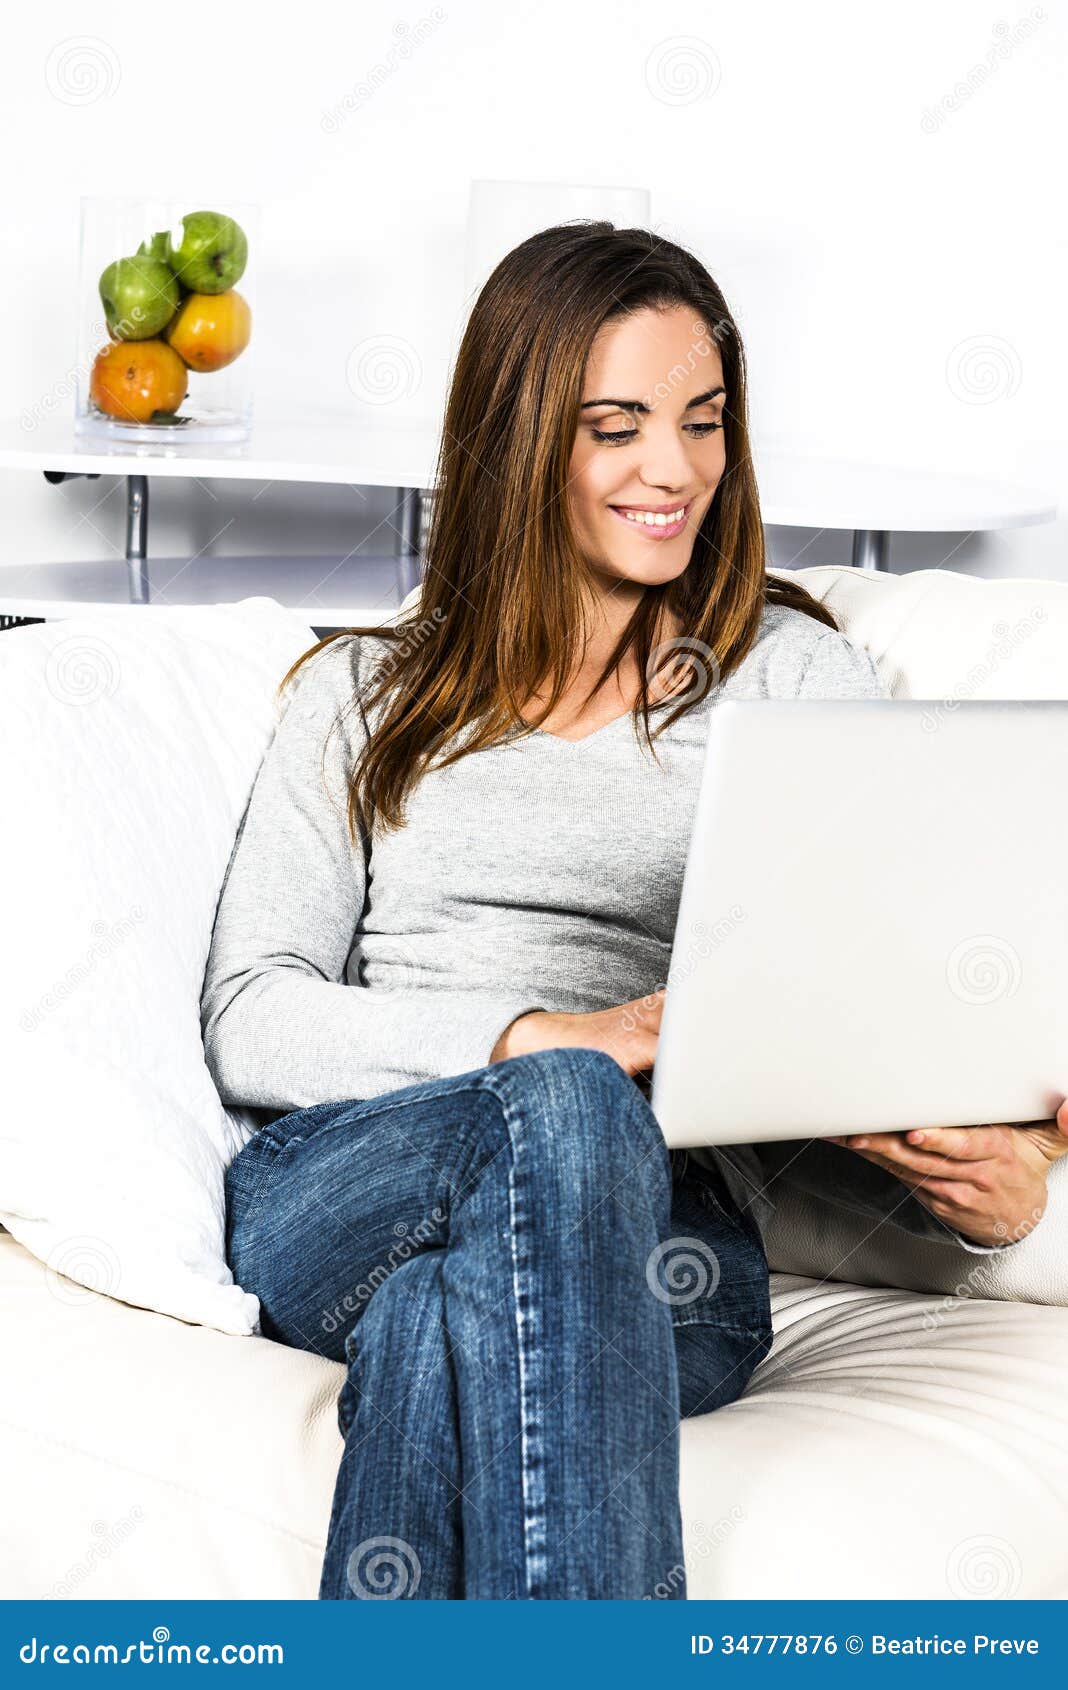 Computer woman stock photo. Image of smartphone, touchpad - 34777876